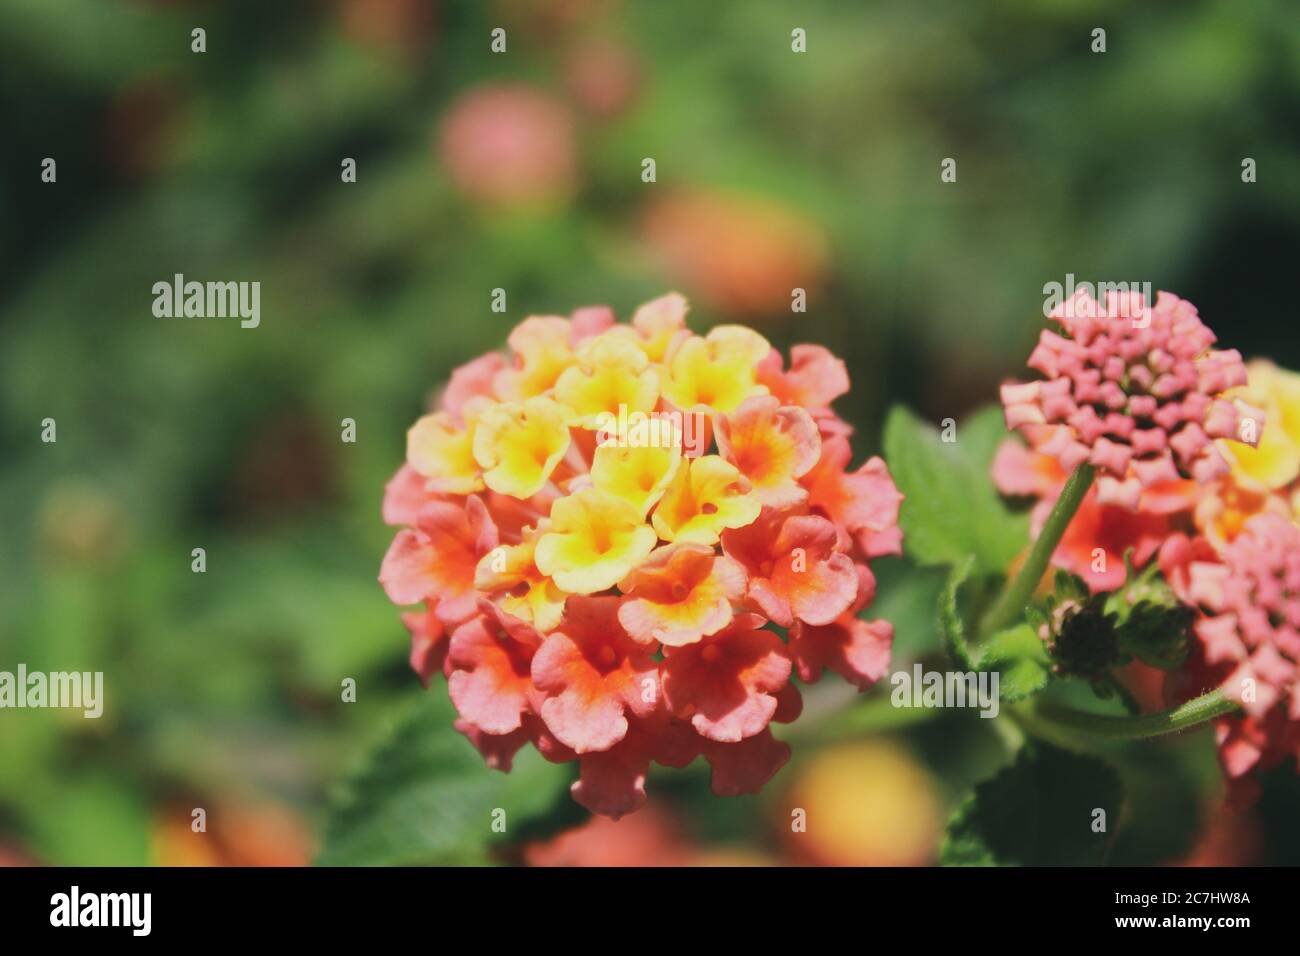 Selective focus shot of Lantana Camara flowers with a blurred background Stock Photo